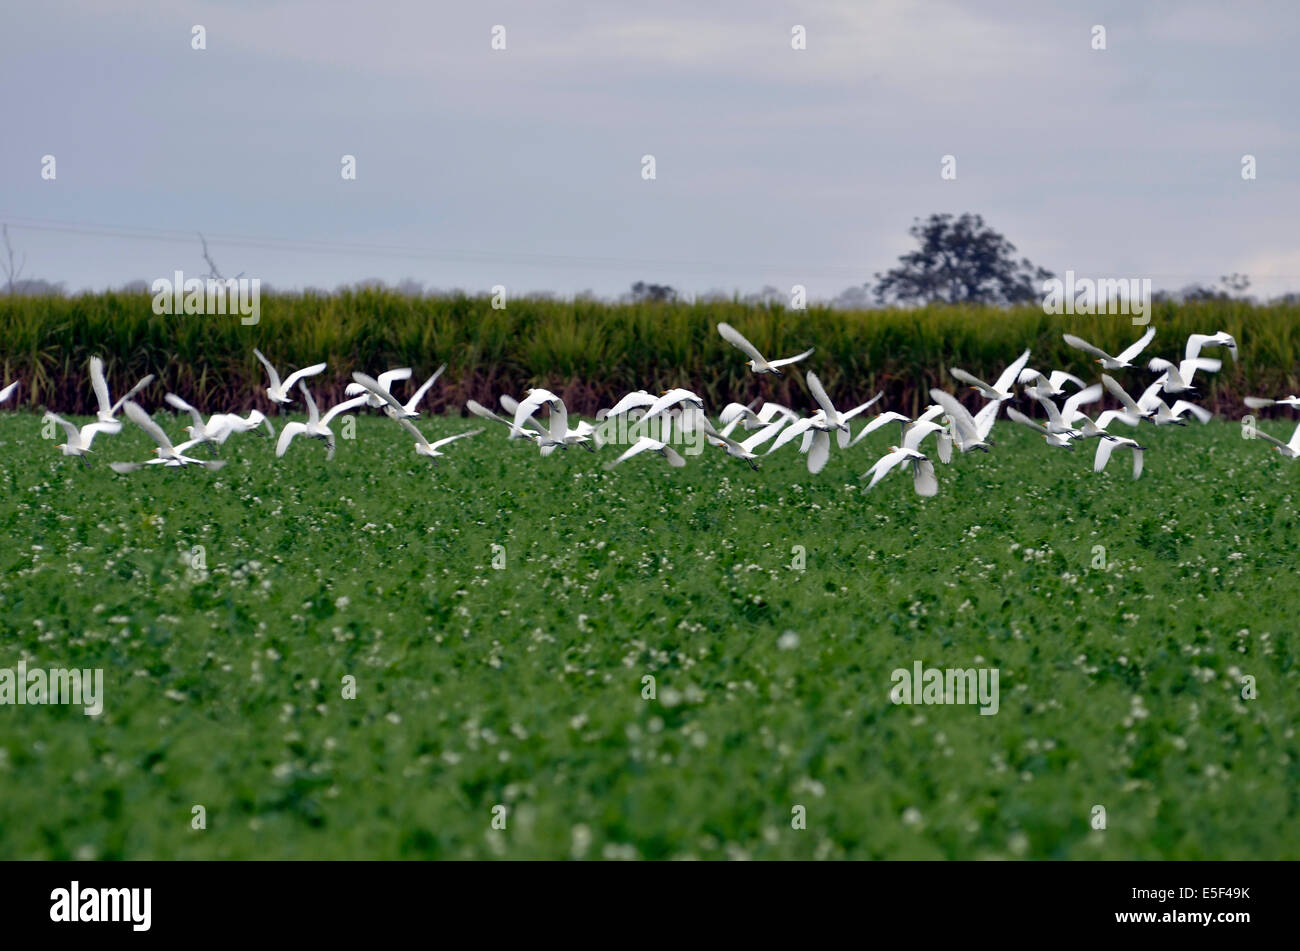 A flock of birds flying over a agricultural crop Stock Photo